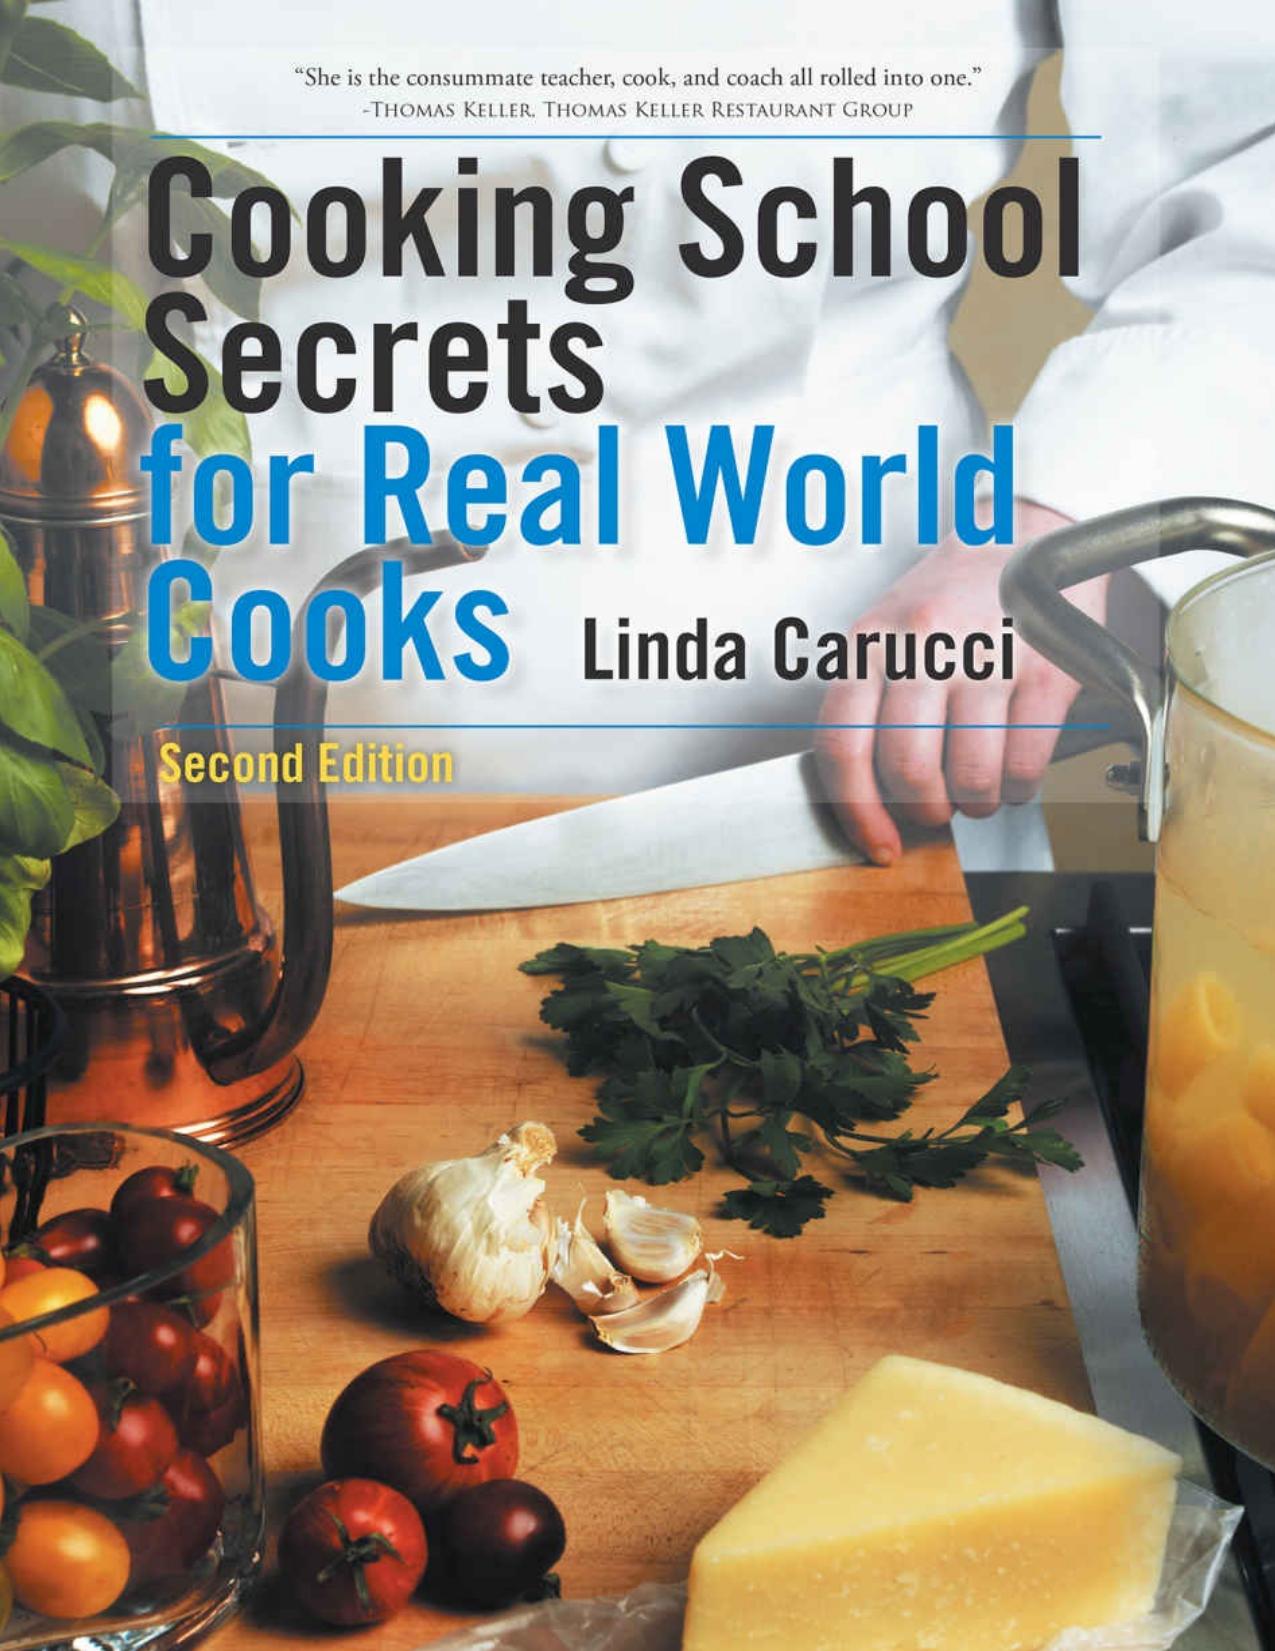 Cooking School Secrets for Real World Cooks - PDFDrive.com